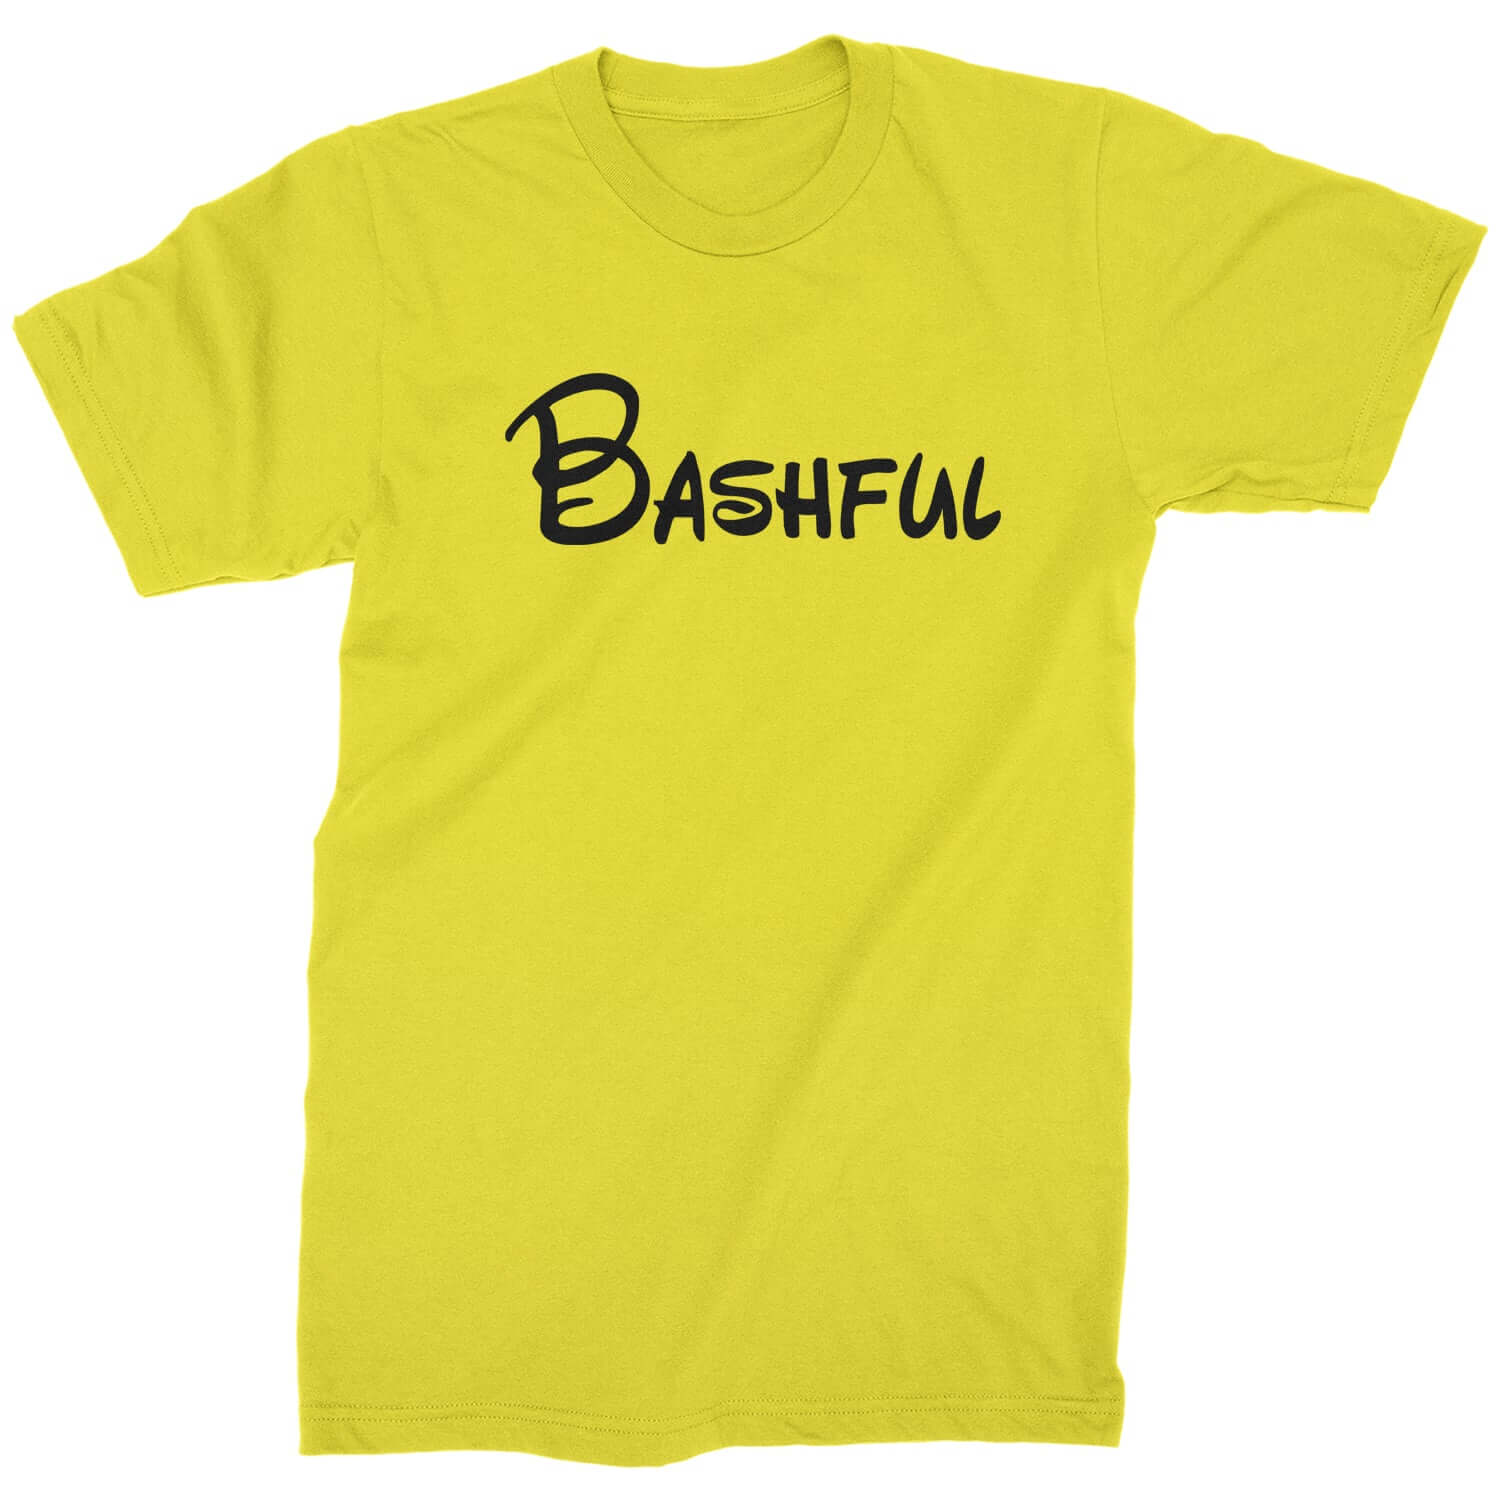 Bashful - 7 Dwarfs Costume Mens T-shirt and, costume, dwarfs, group, halloween, matching, seven, snow, the, white by Expression Tees